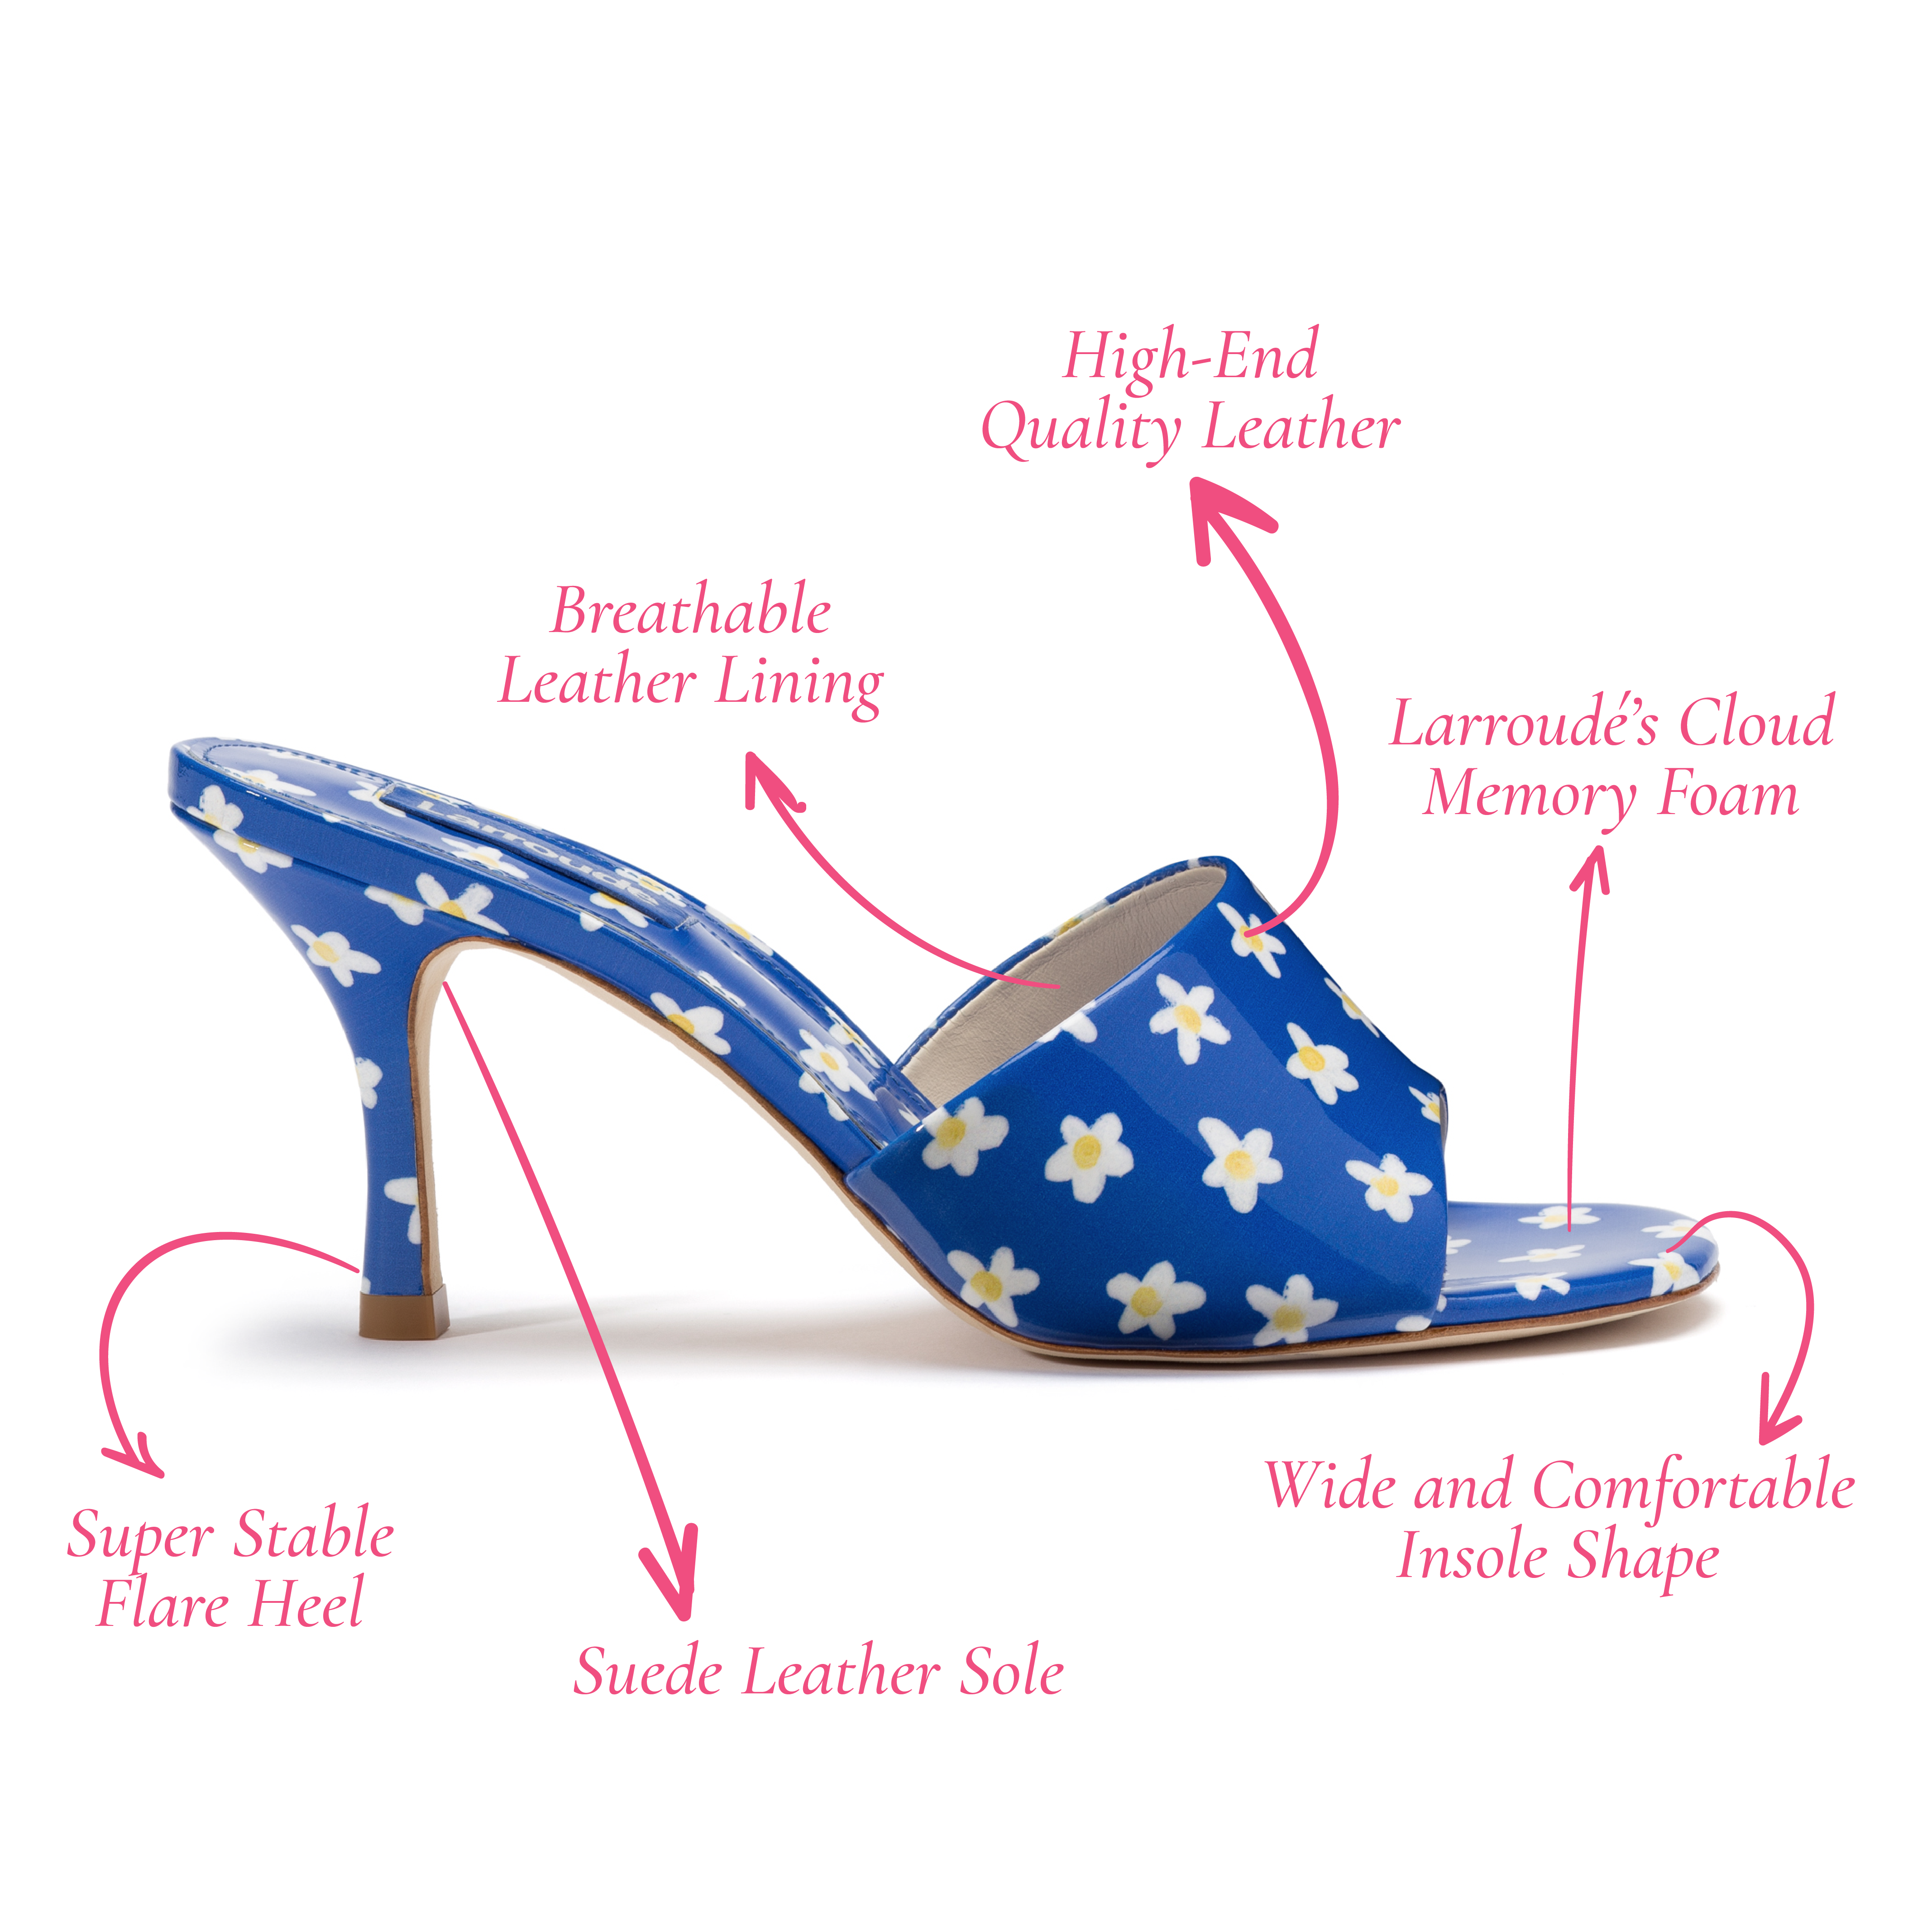 Colette Mule In Blue Floral Patent Leather